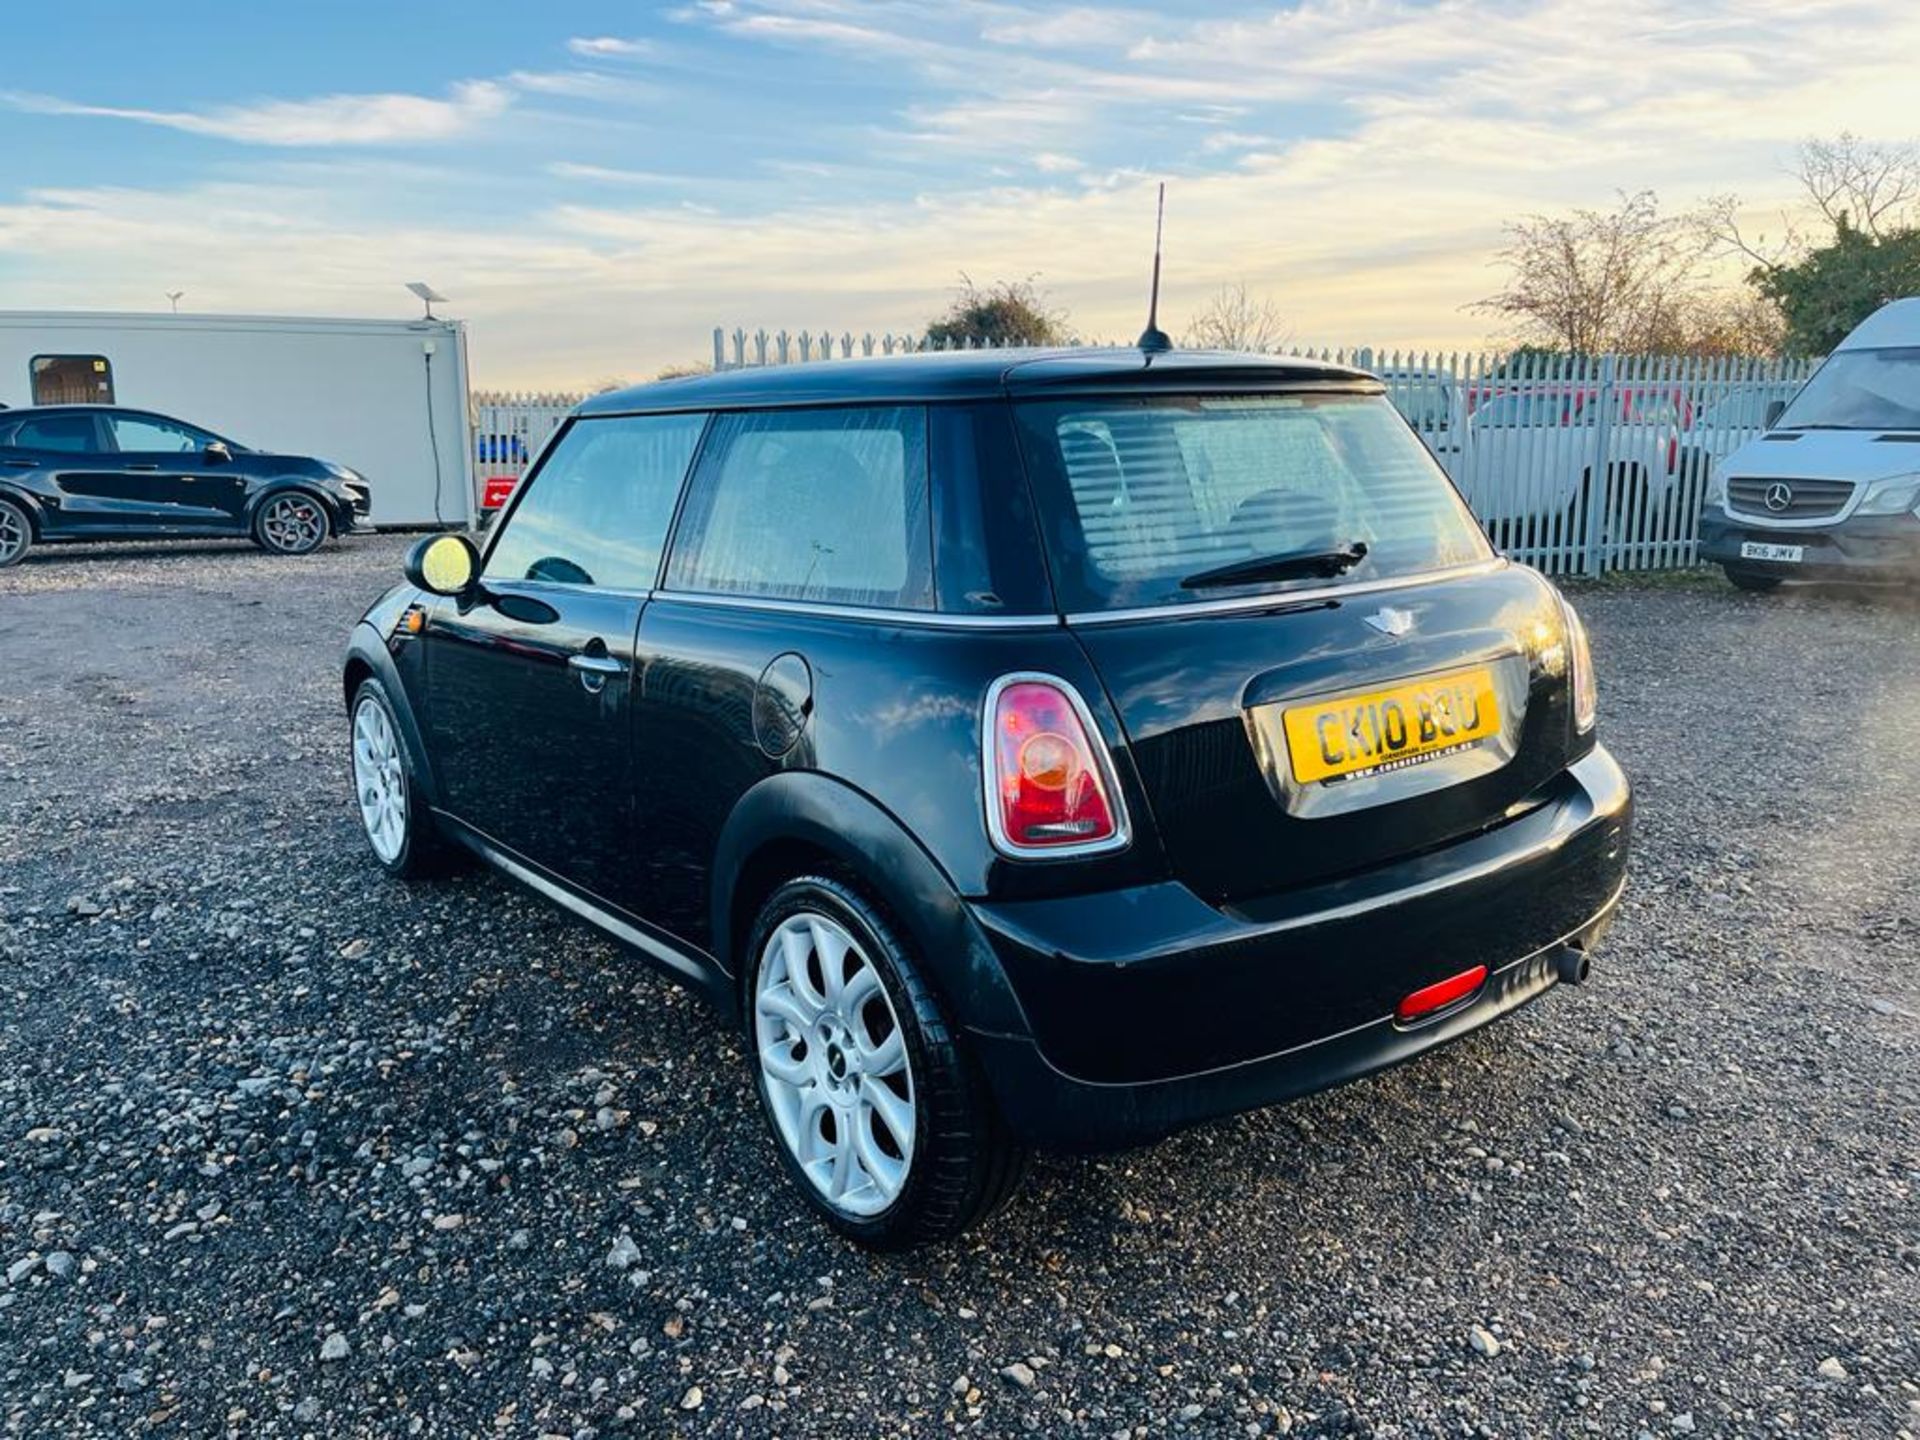 ** ON SALE ** Mini One 1.6 Start/Stop 100 2010 '10 Reg' ' Very Economical' Only 108,430 - No Vat - Image 5 of 26